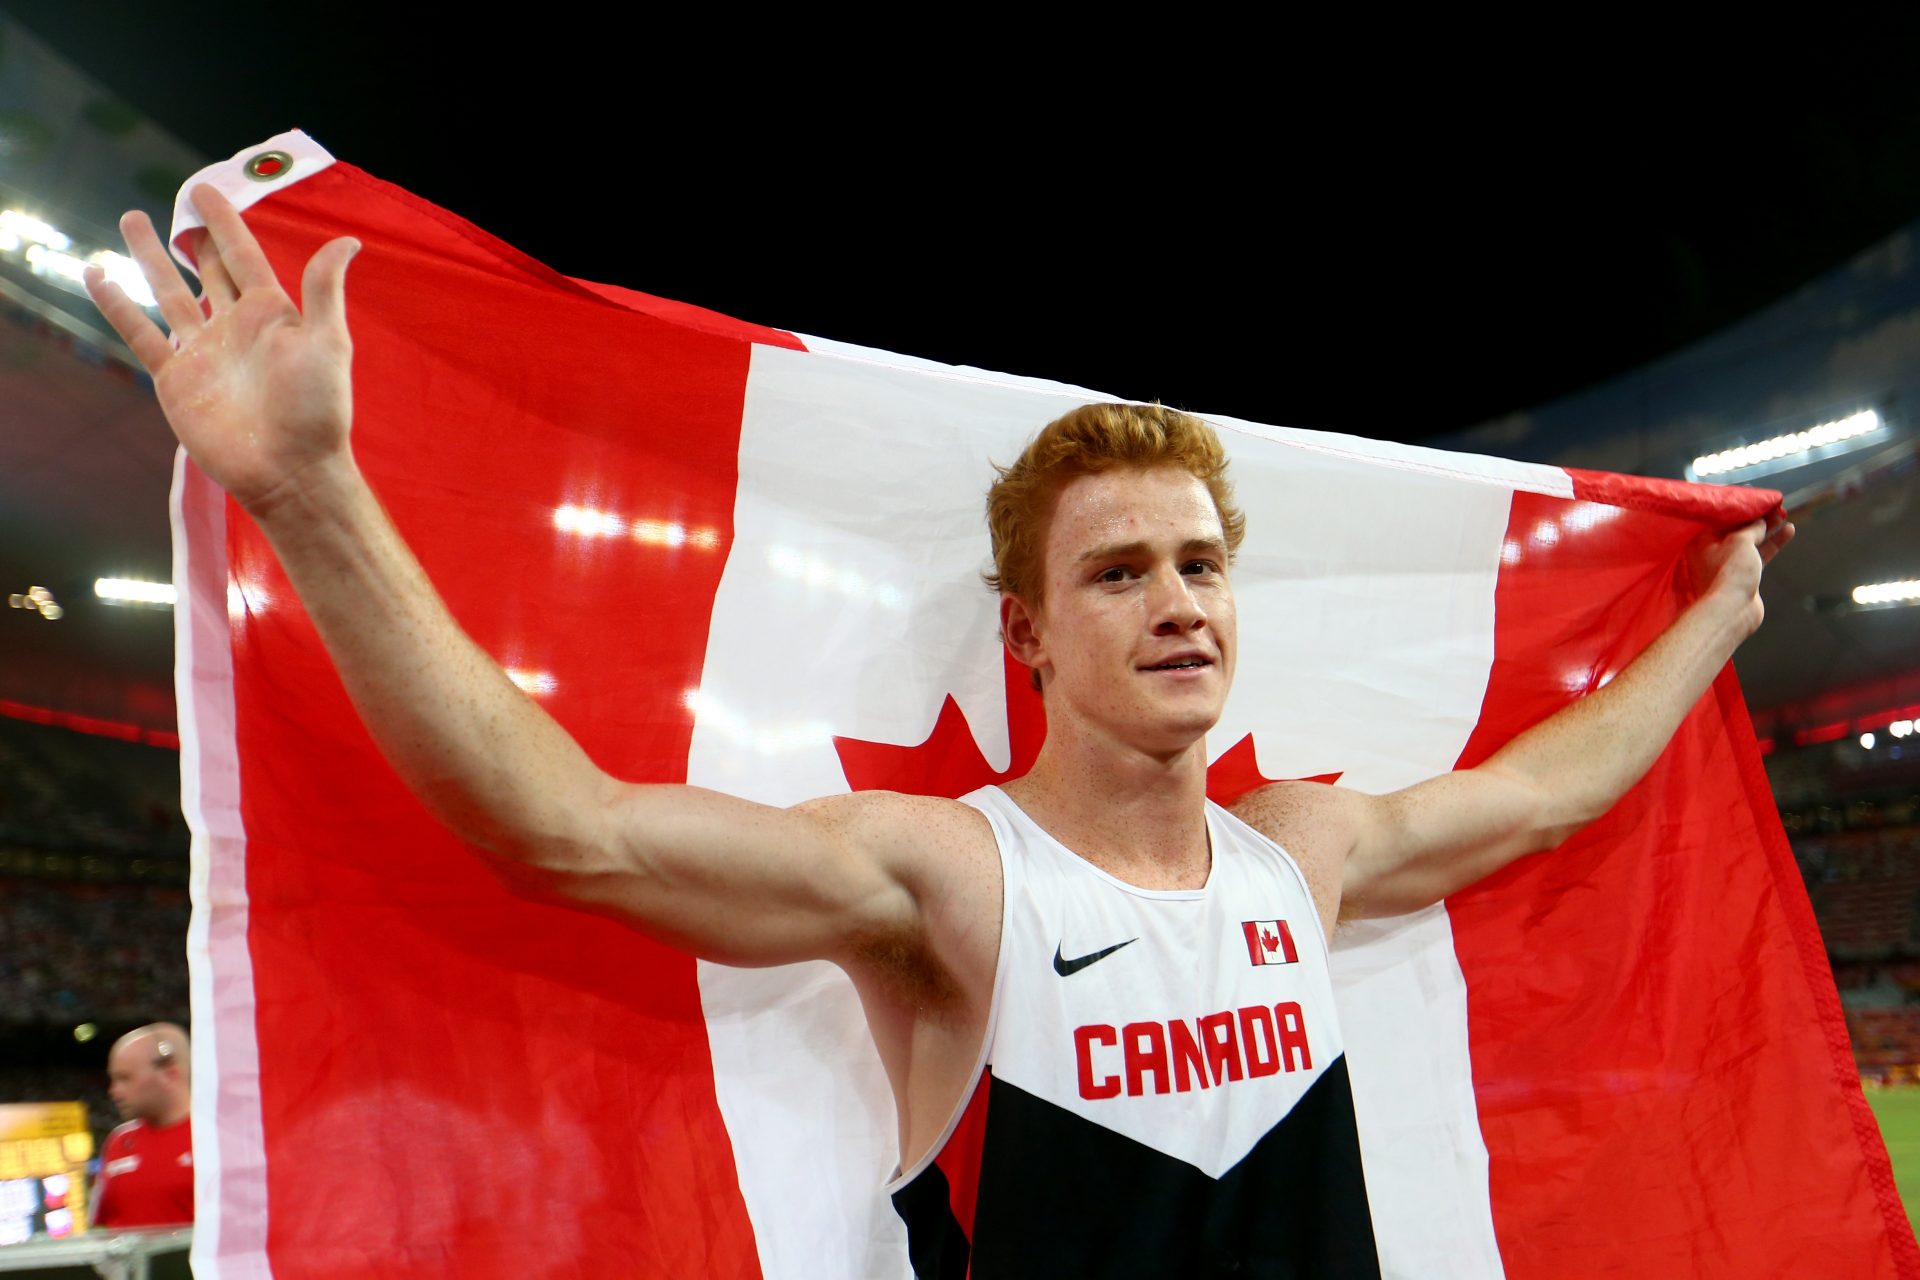 Remembering Olympian Shawn Barber, who died aged 29